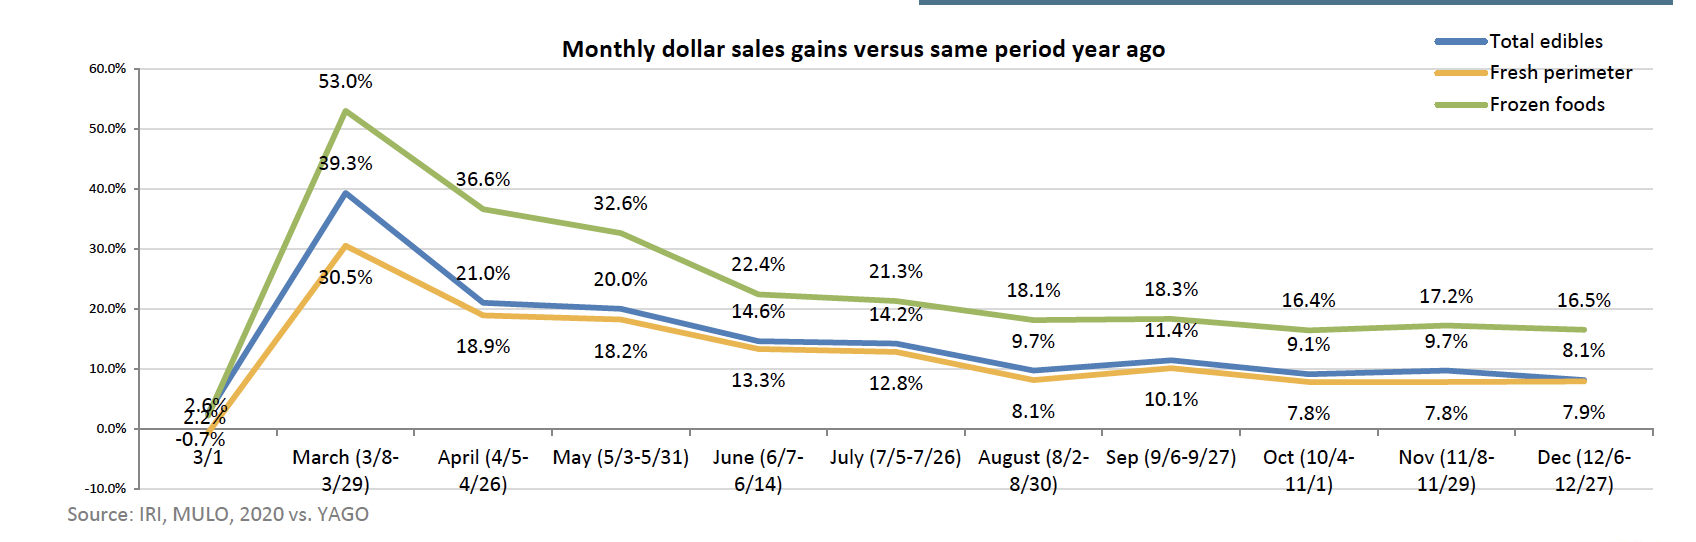 Frozen_monthly_dollar_sales_gains.png